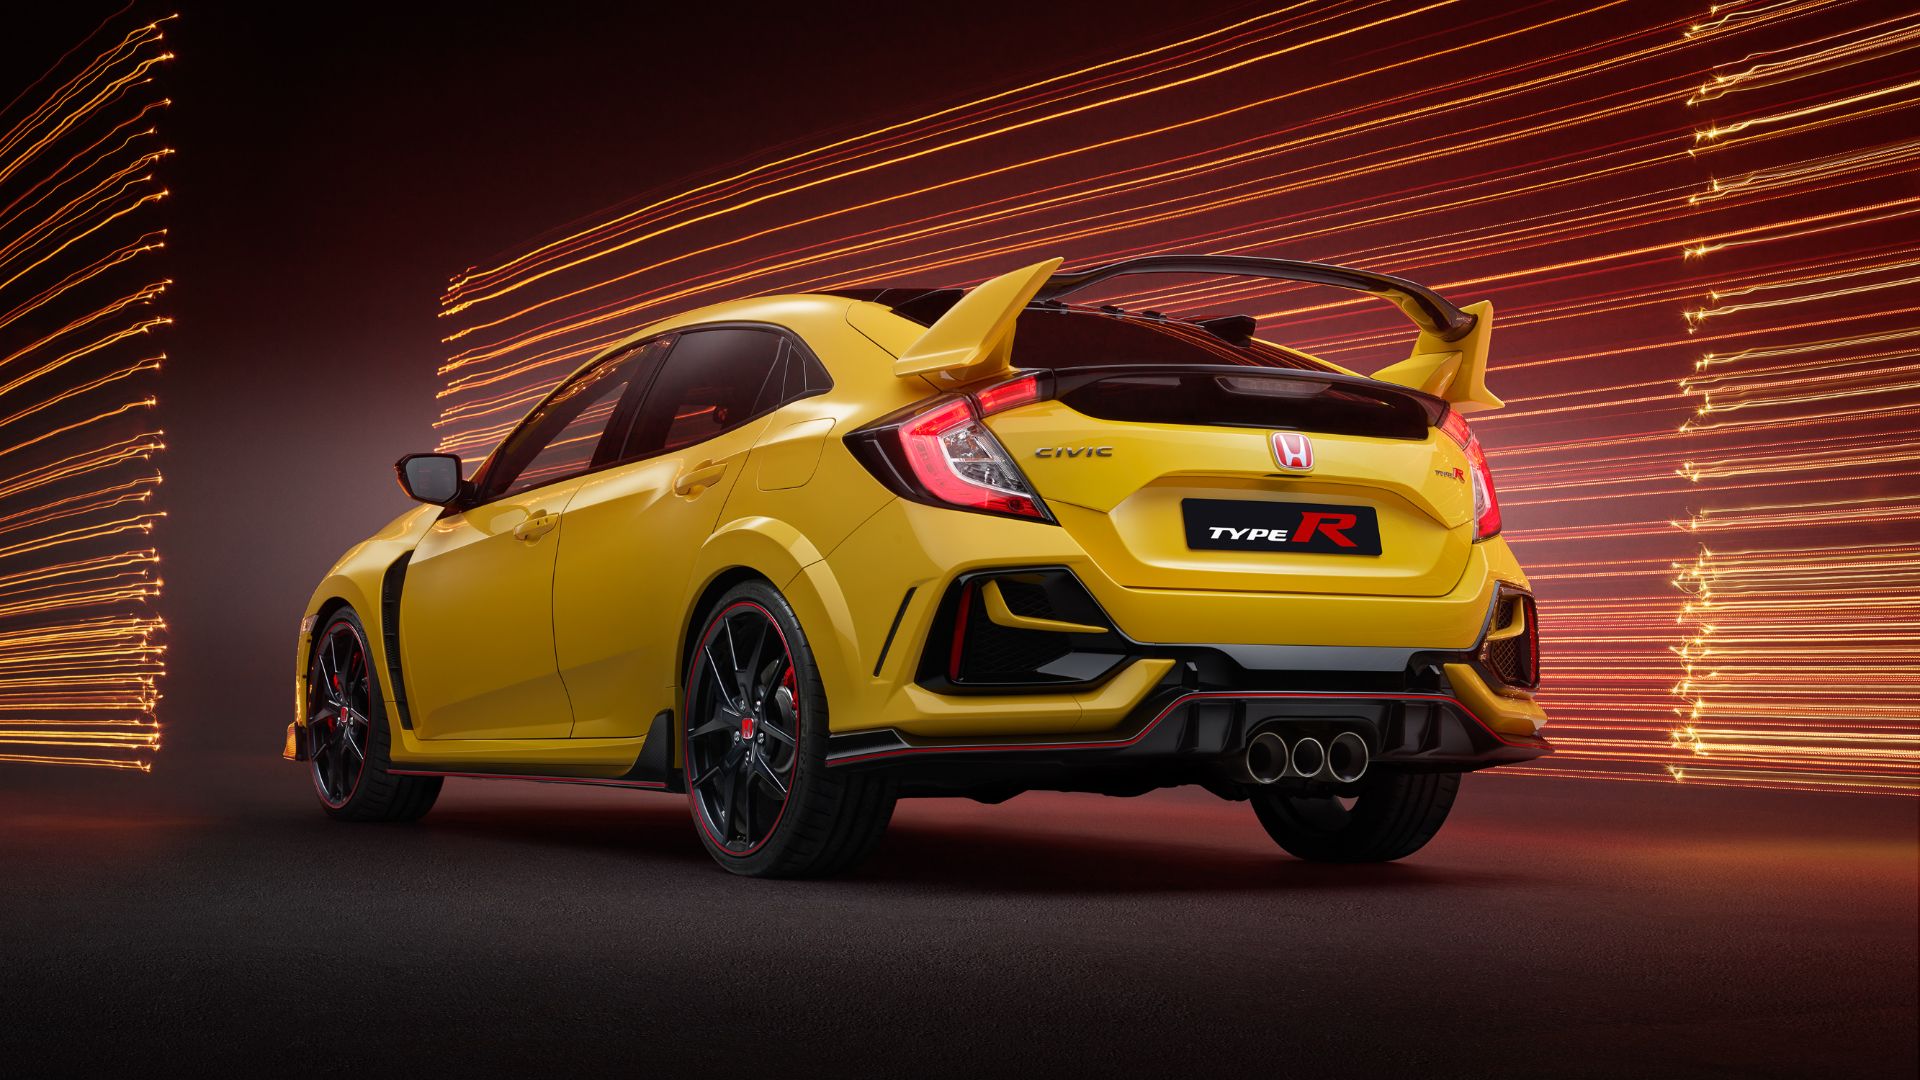 2020 Honda Civic Type R limited edition sells out